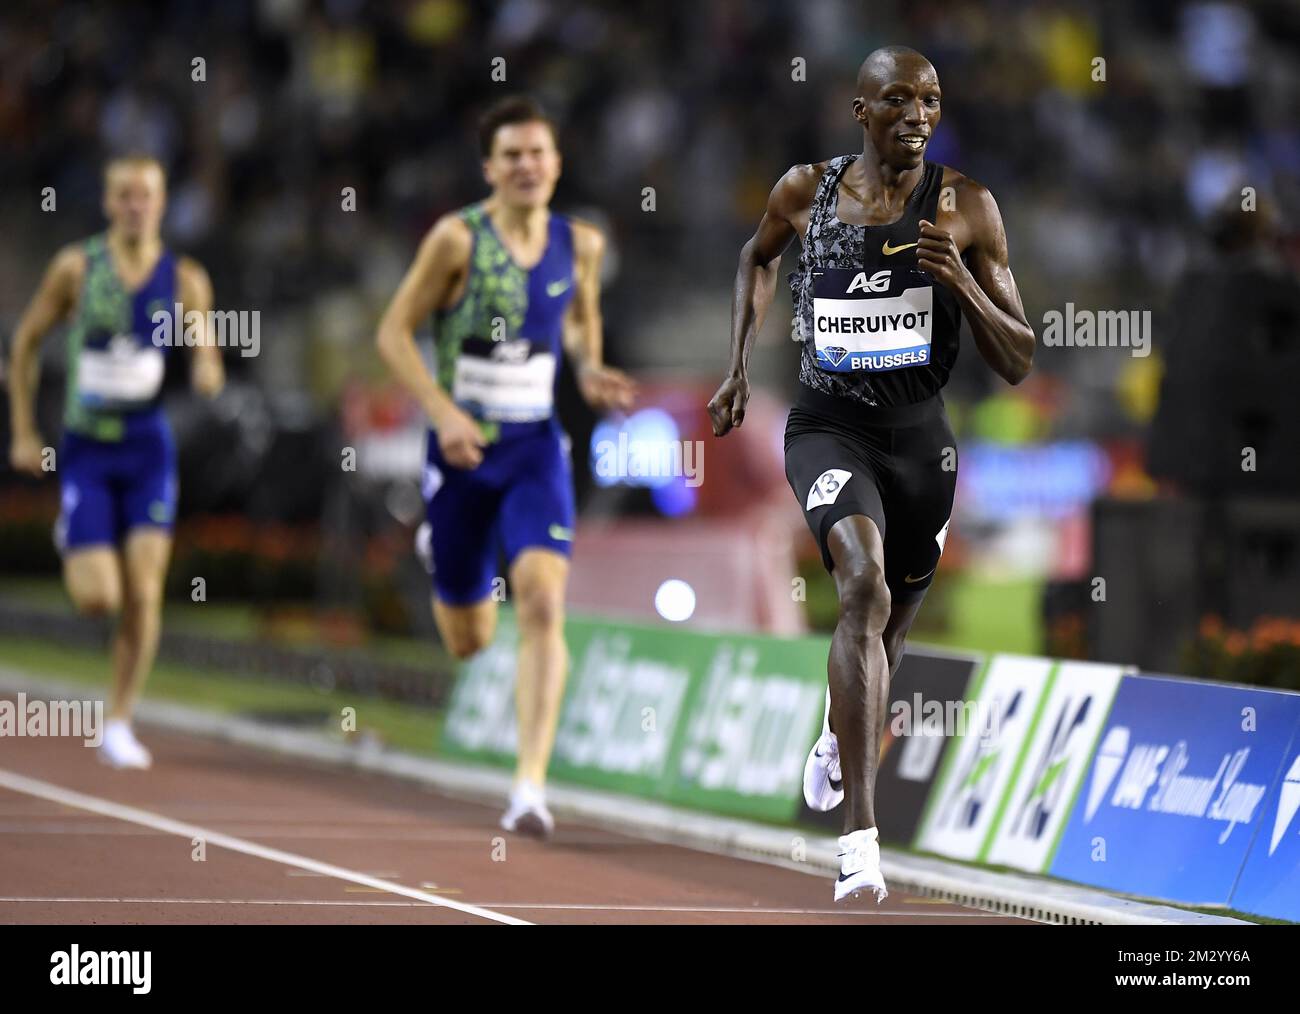 Kenya's Timothy Cheruiyot (R) pictured at the men's 1500m race at the 2019 edition of the AG Insurance Memorial Van Damme IAAF Diamond League athletics meeting, Friday 06 September 2019 in Brussels. BELGA PHOTO JASPER JACOBS Stock Photo